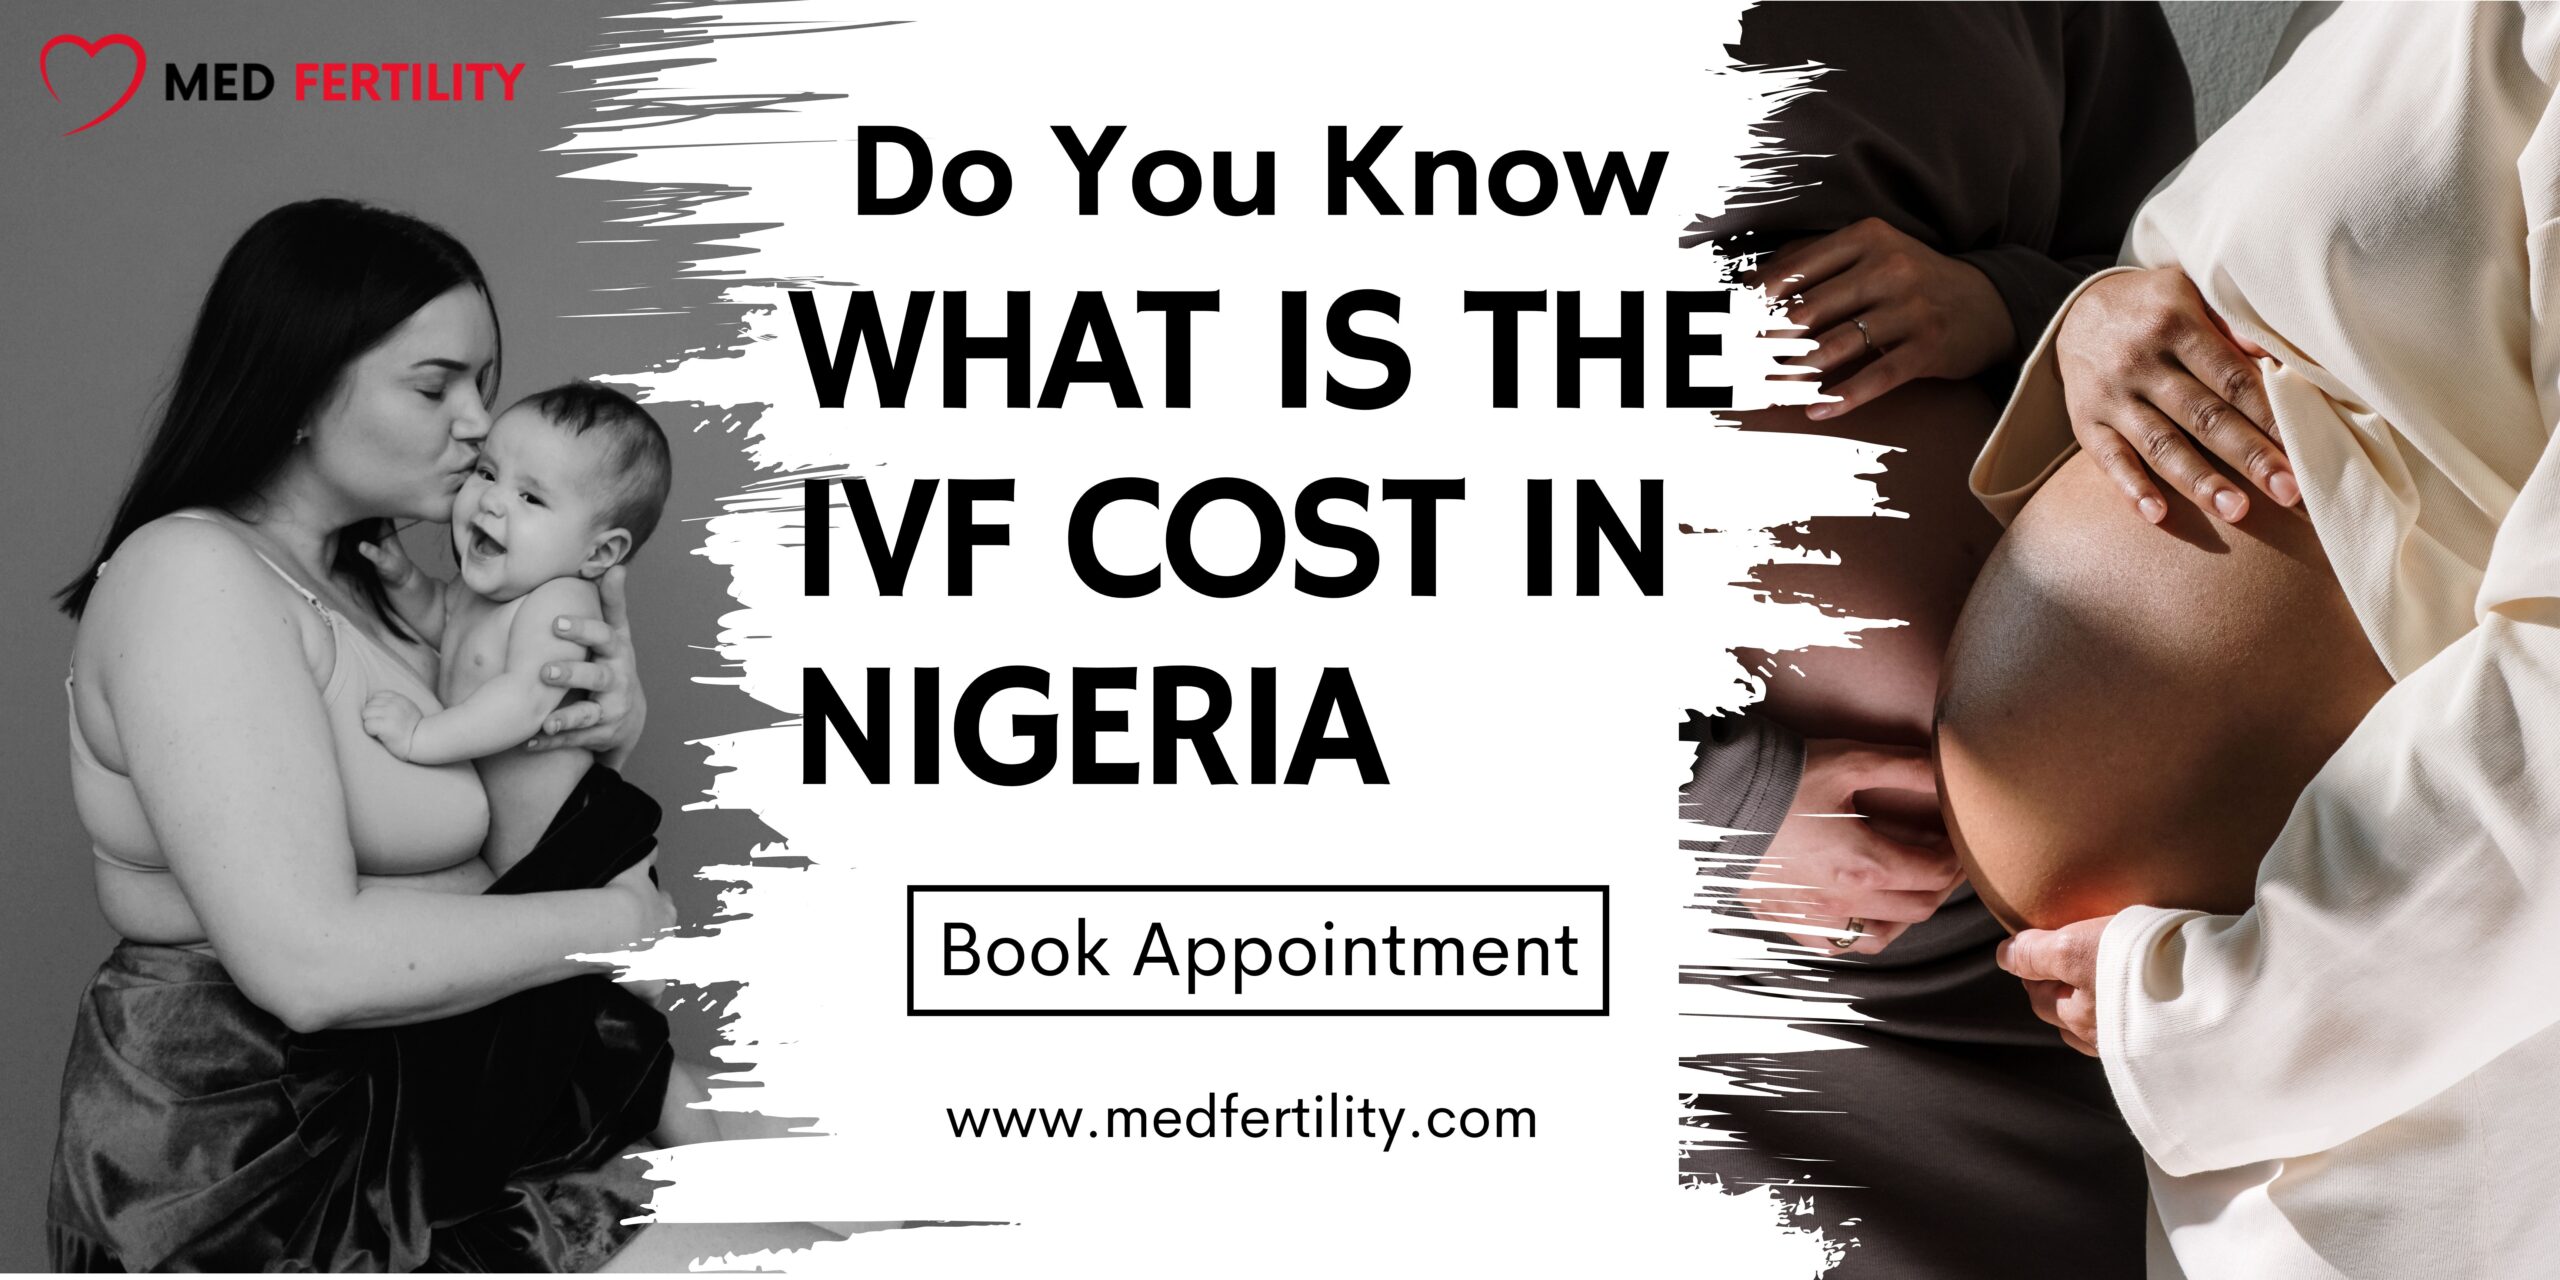 Do You Know What is The IVF Cost in Nigeria 2023